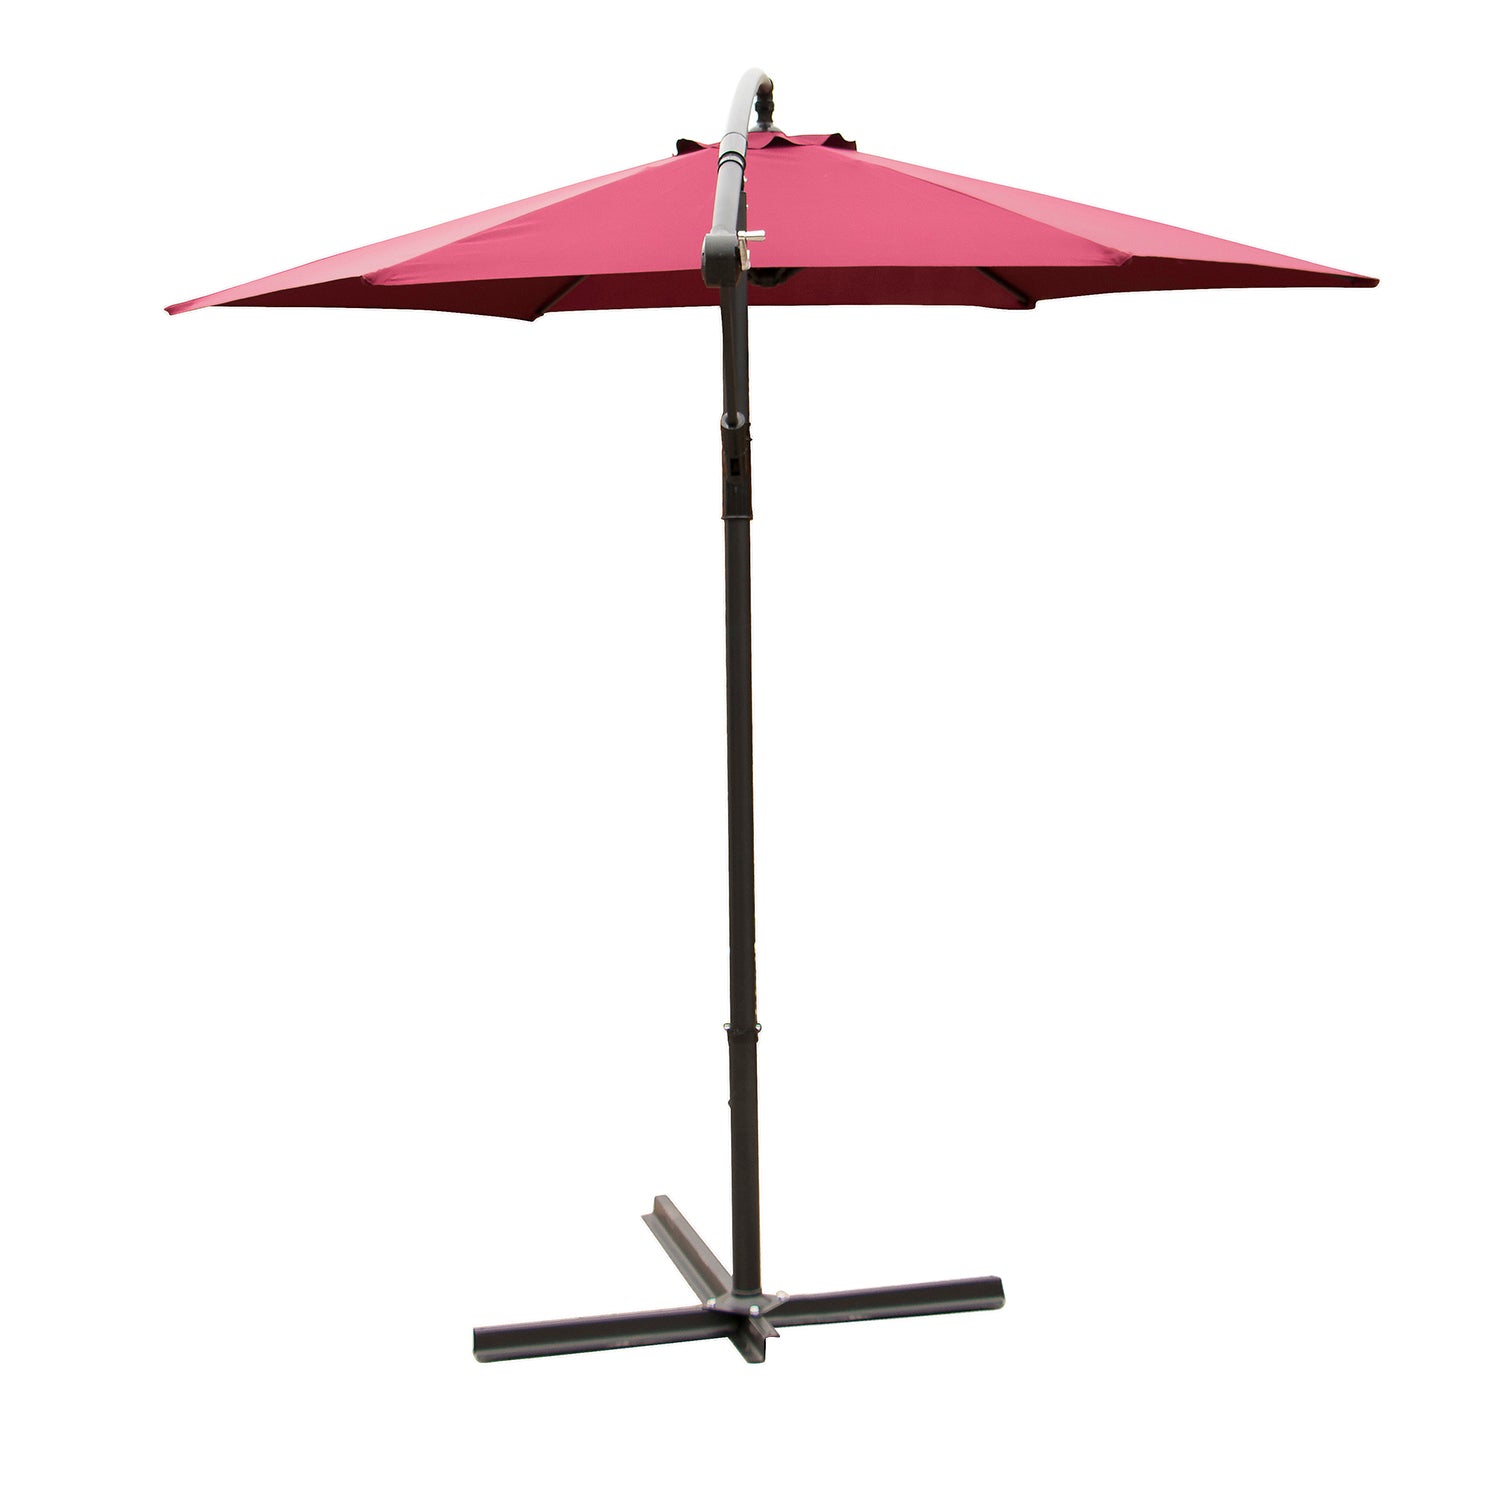 10FT Patio Umbrella Outdoor Market Table  Foldable Umbrella Sun Shade Hanging Canopy Offset Crank Wine Red w/Ribs